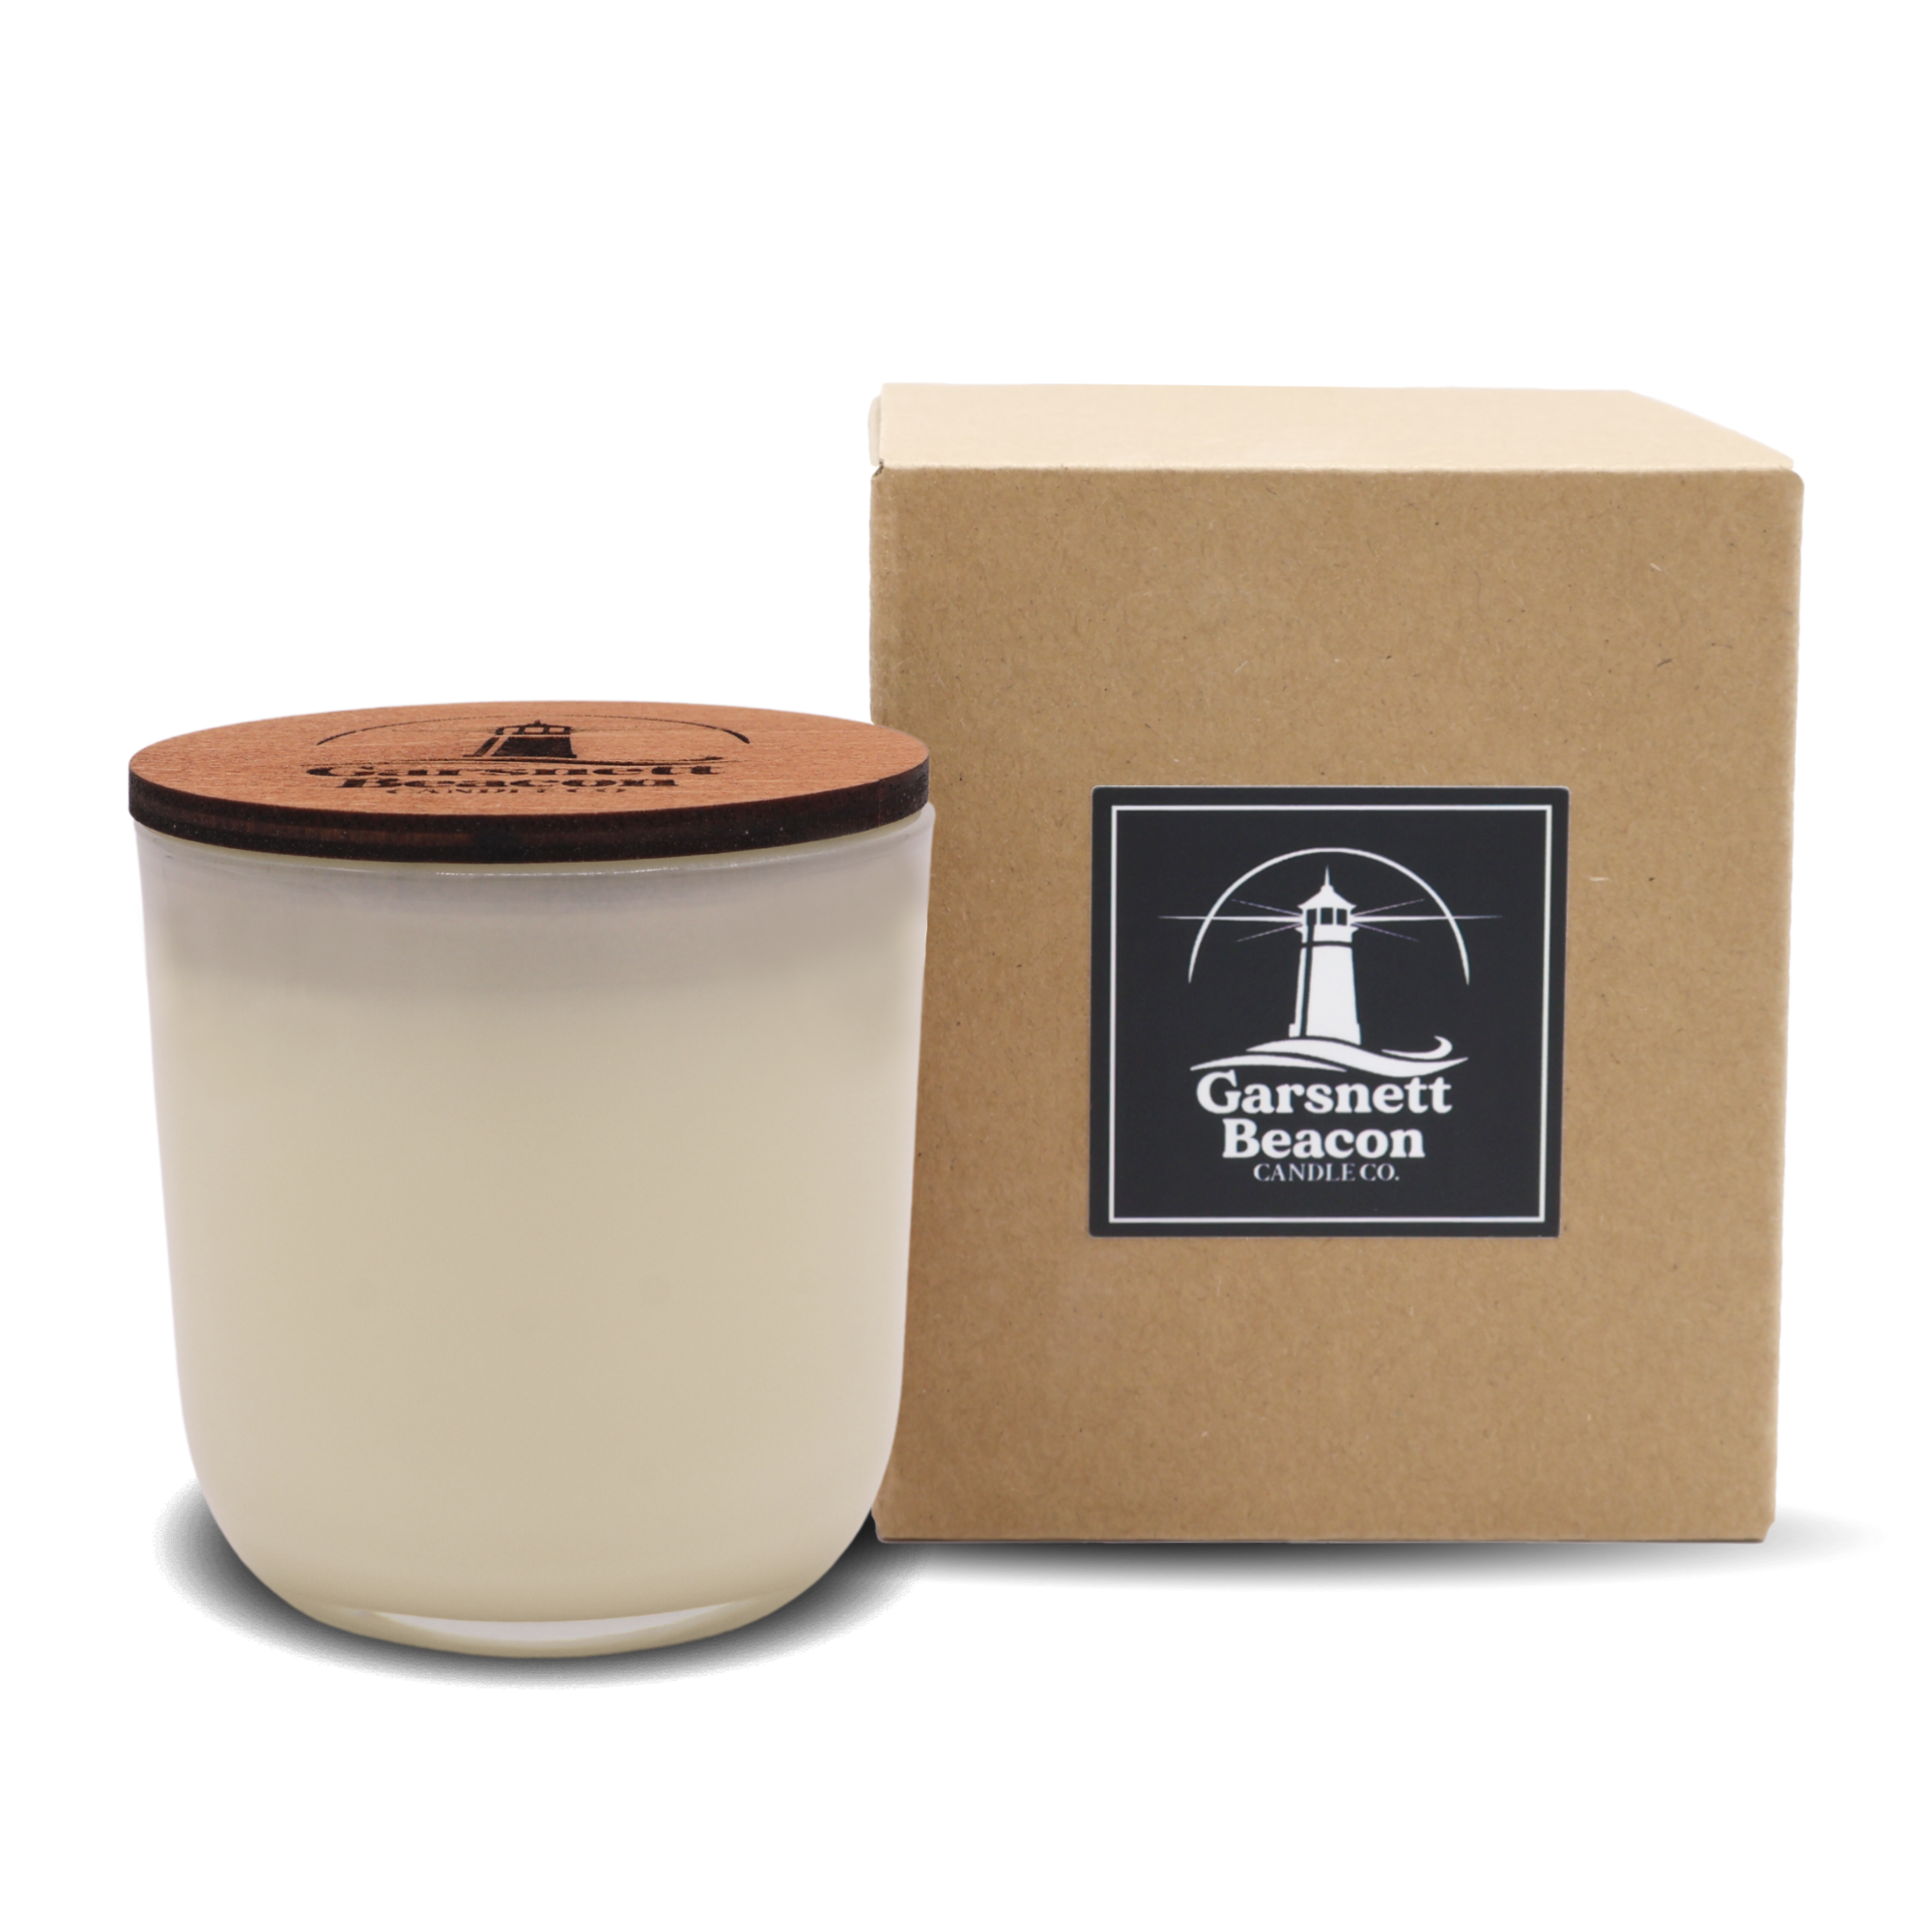 Transform your home with the Lumina candle, inspired by Westin Hotels. A luxurious blend of white tea, bergamot, and jasmine in premium Coconut Soy Wax.